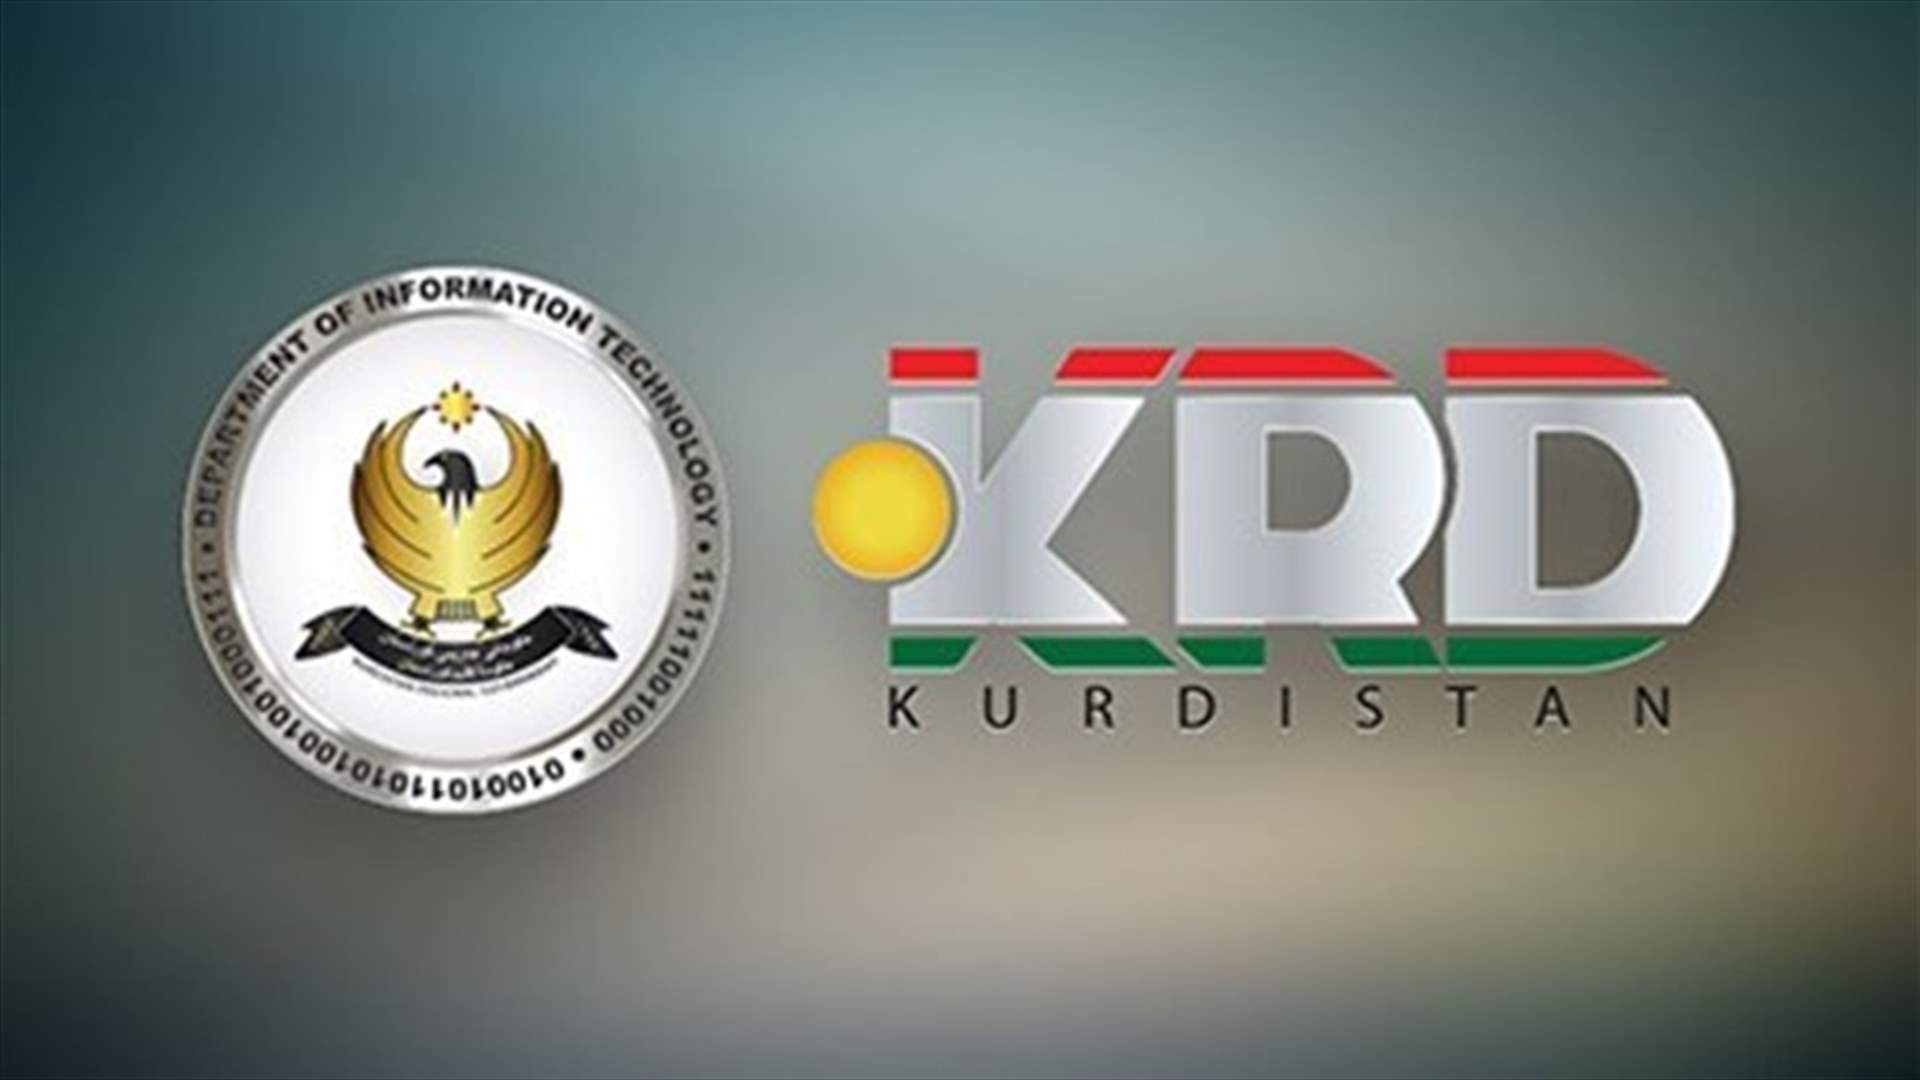 Iraq&#39;s Kurds declare independence in cyberspace with .krd domain name